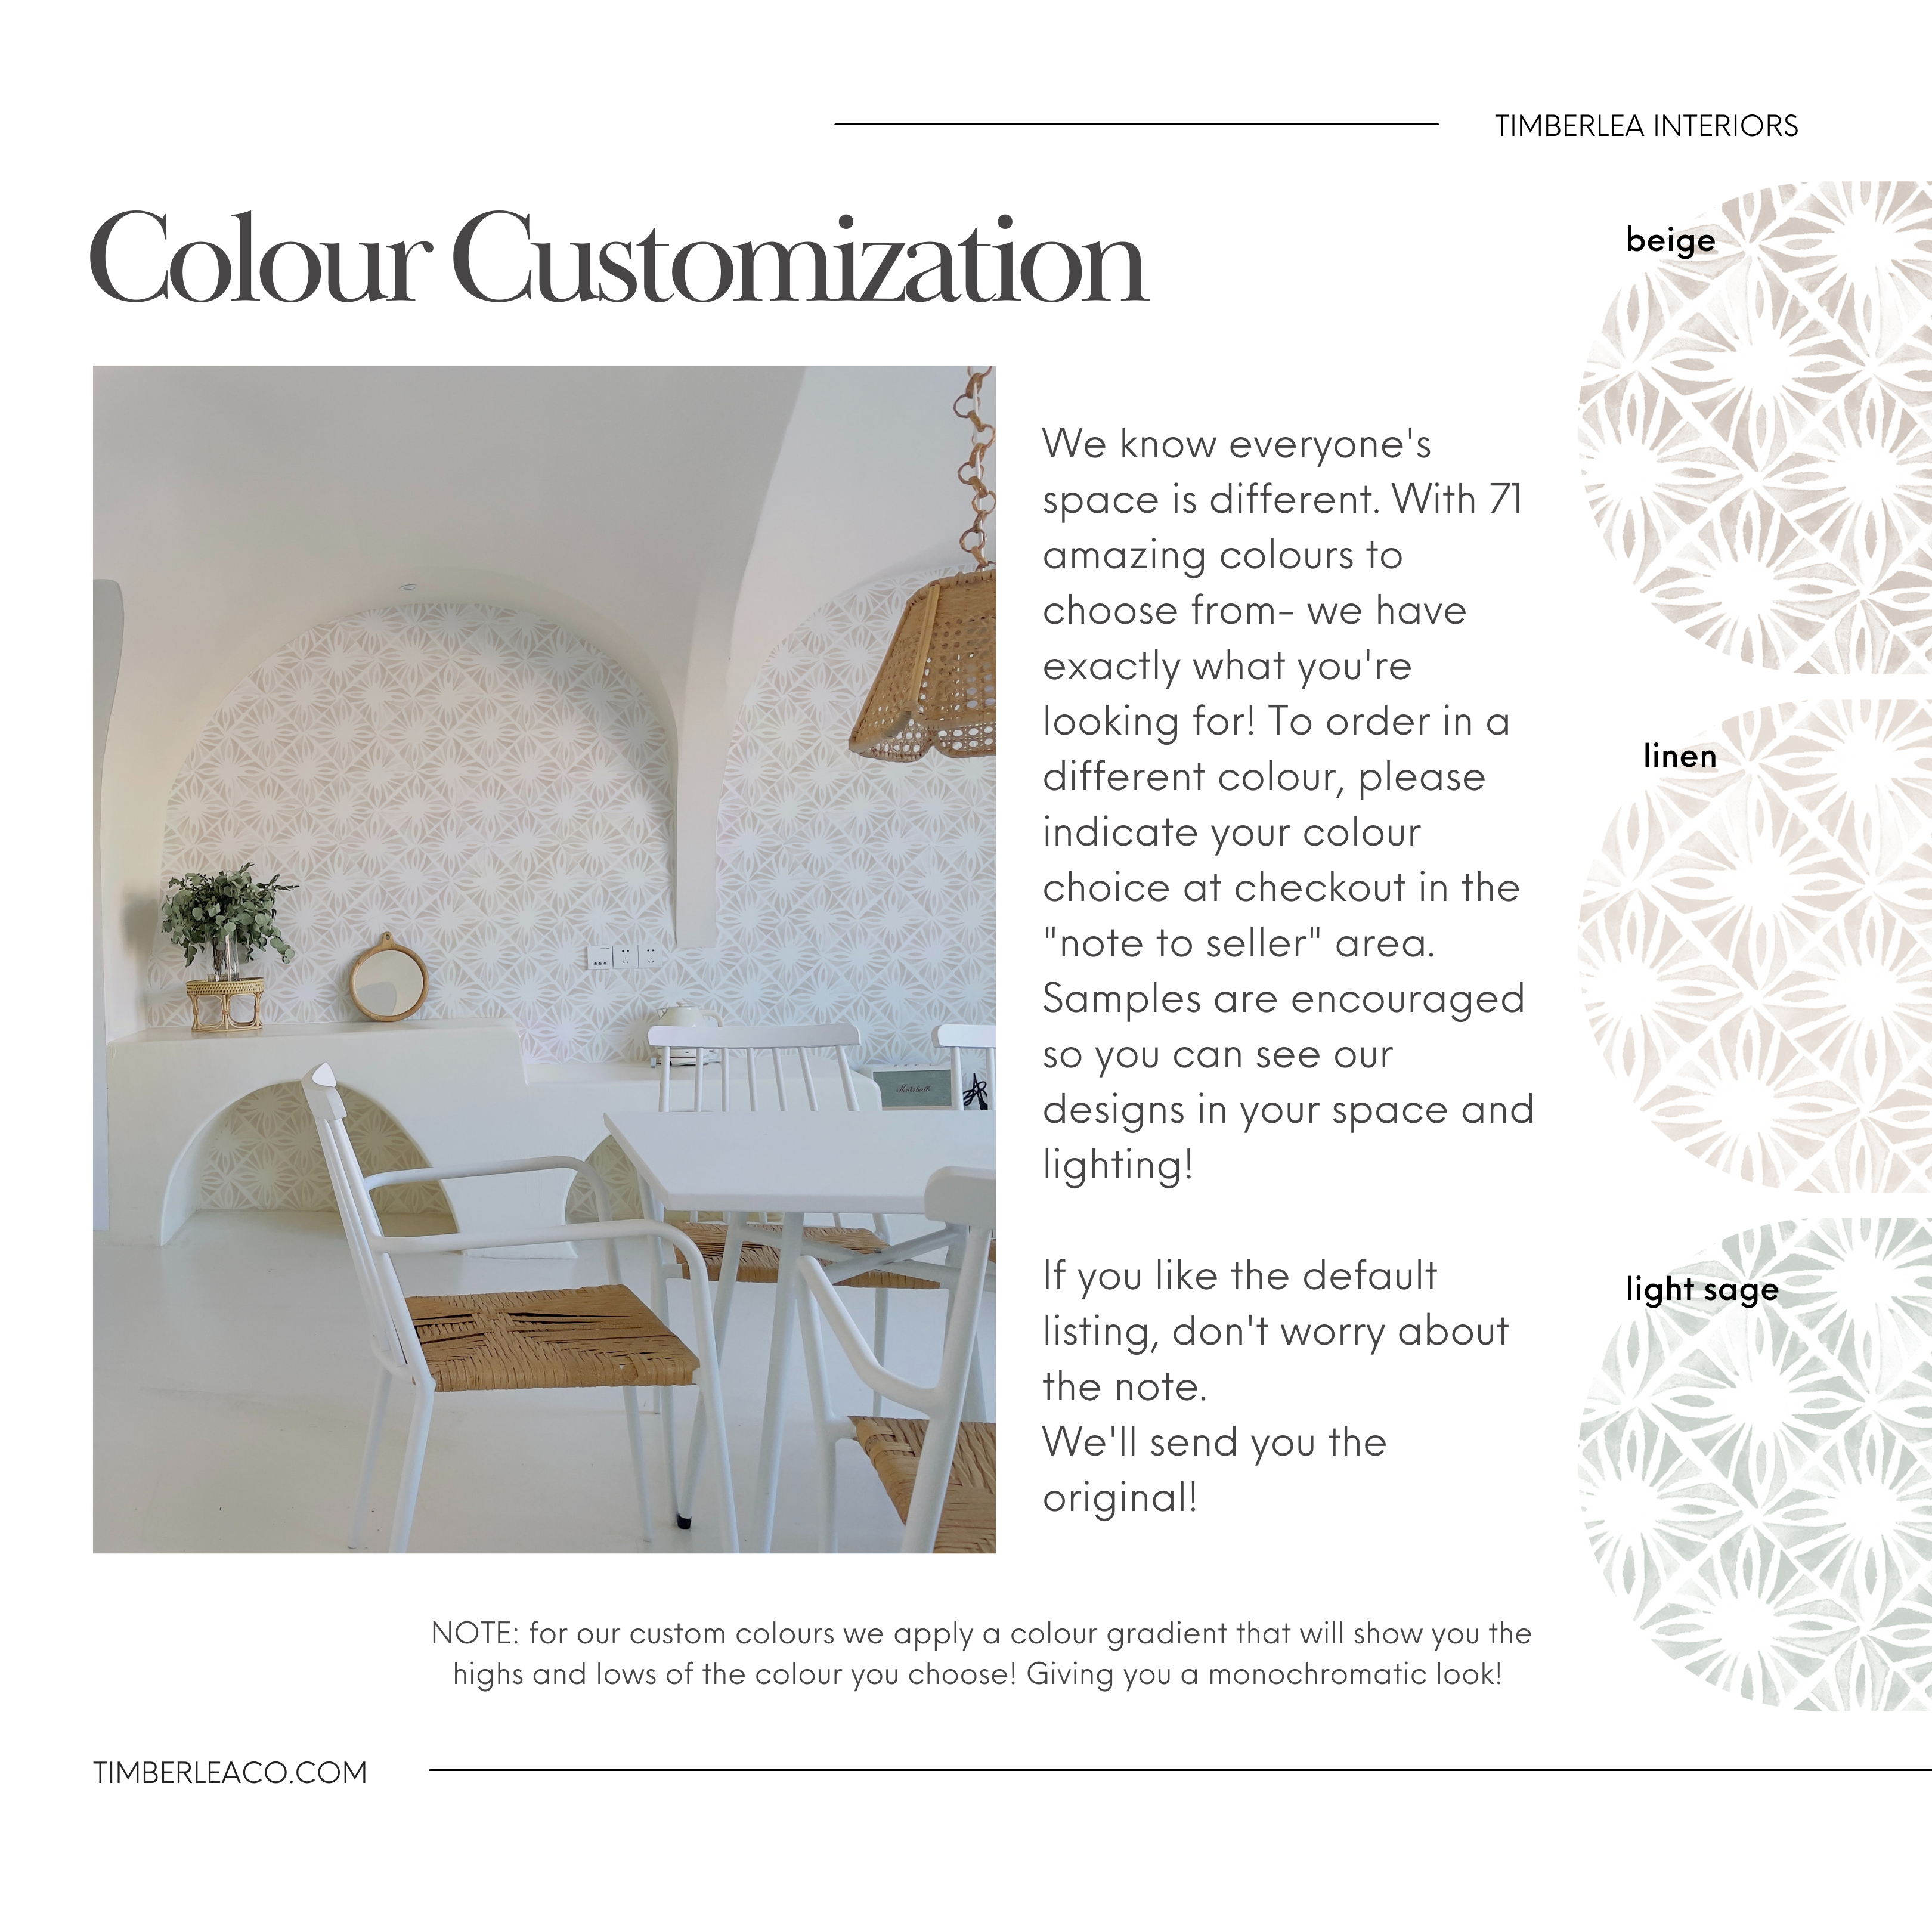 A promotional graphic by Timberlea Interiors for 'Colour Customization' of wallpapers, depicting a stylish kitchen with upper walls covered in a subtle geometric-patterned wallpaper. The image features text offering 71 color options for customization and encourages buyers to request samples to see how the designs look in their space's lighting.